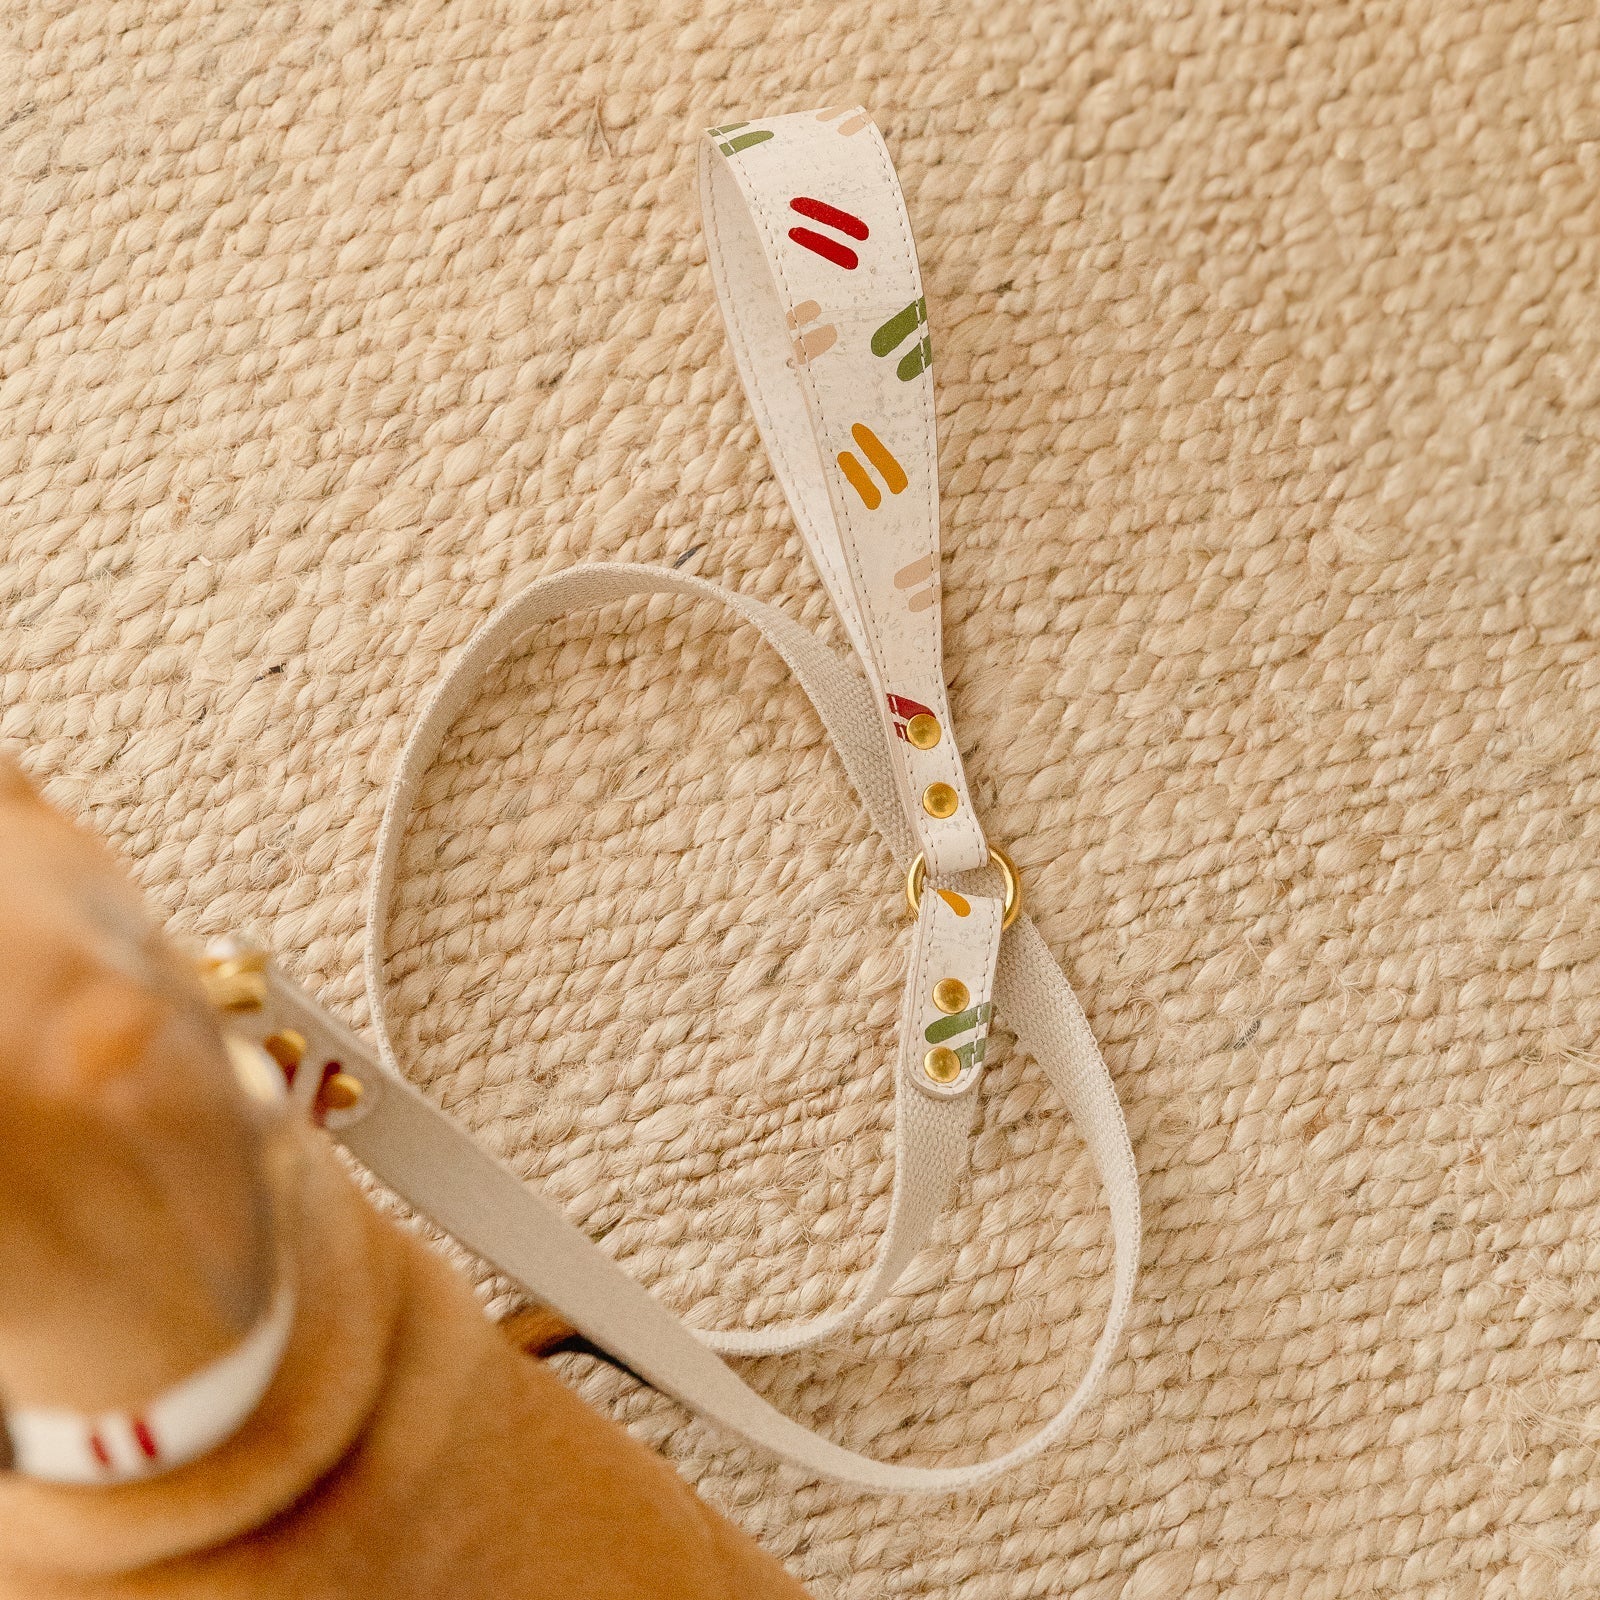 vegan cork leather dog lead with organic hemp webbing and brass hardware, attached to italian greyhound sitting on a jute rug, top view